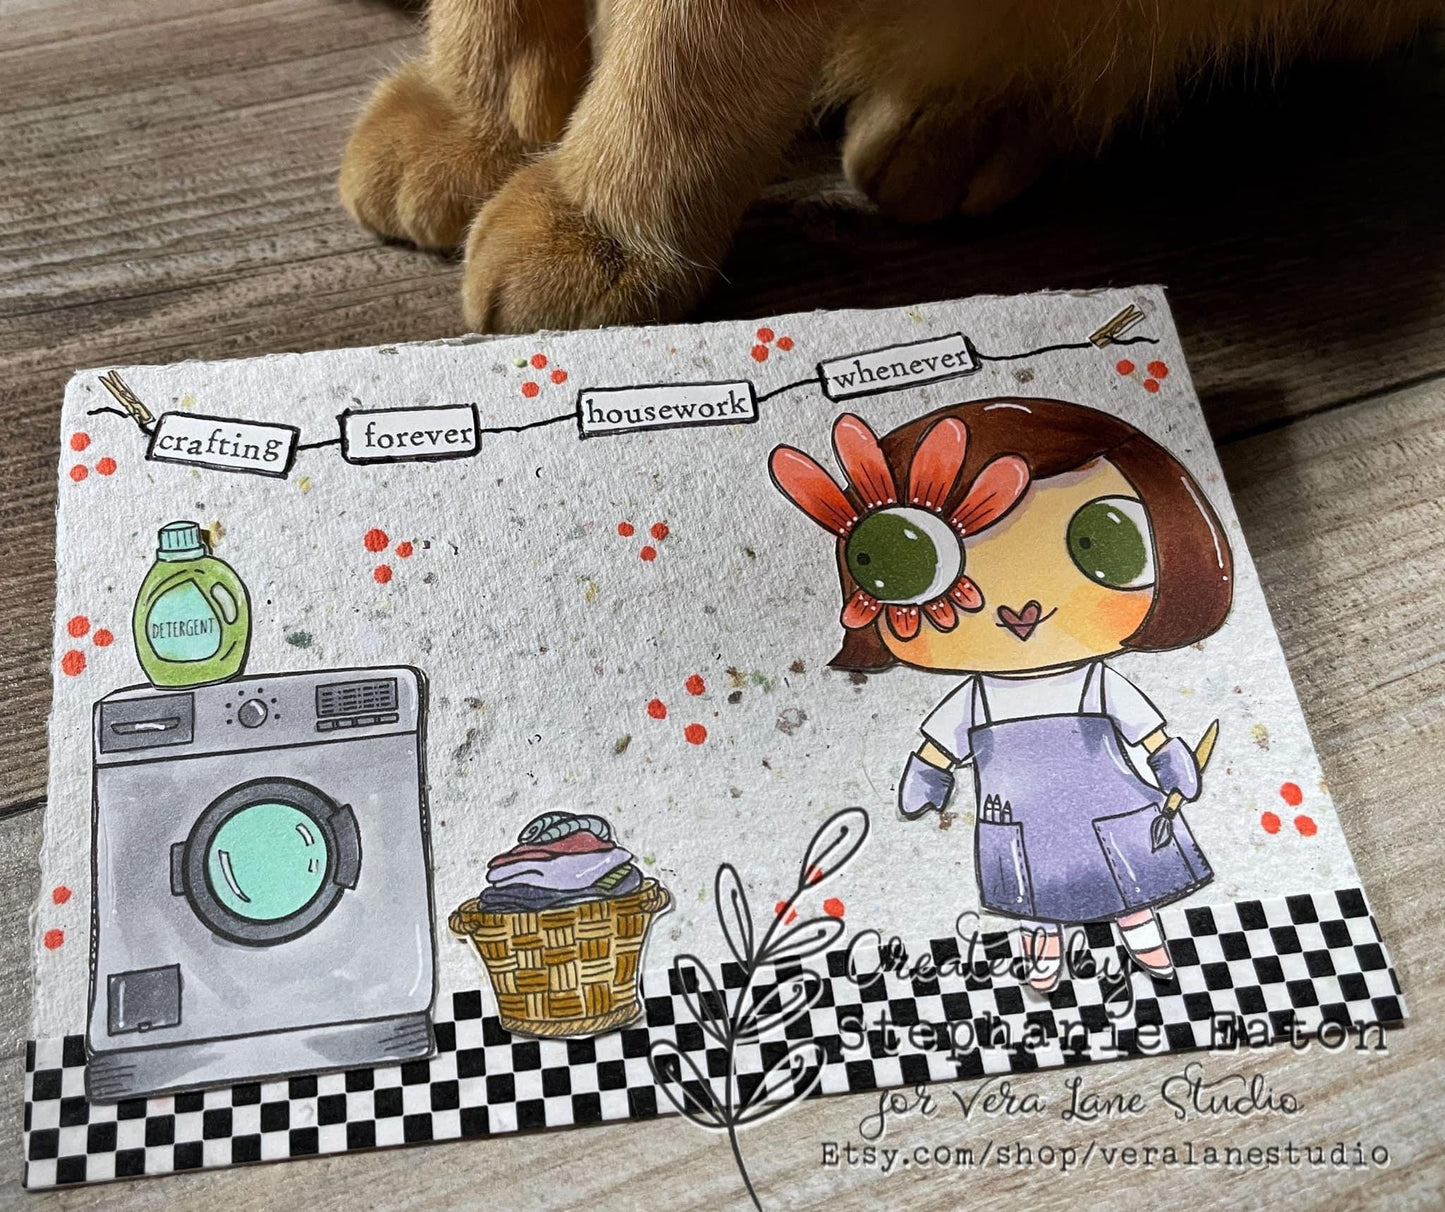 Housework whenever -  7 digi stamp bundle in jpg and png files